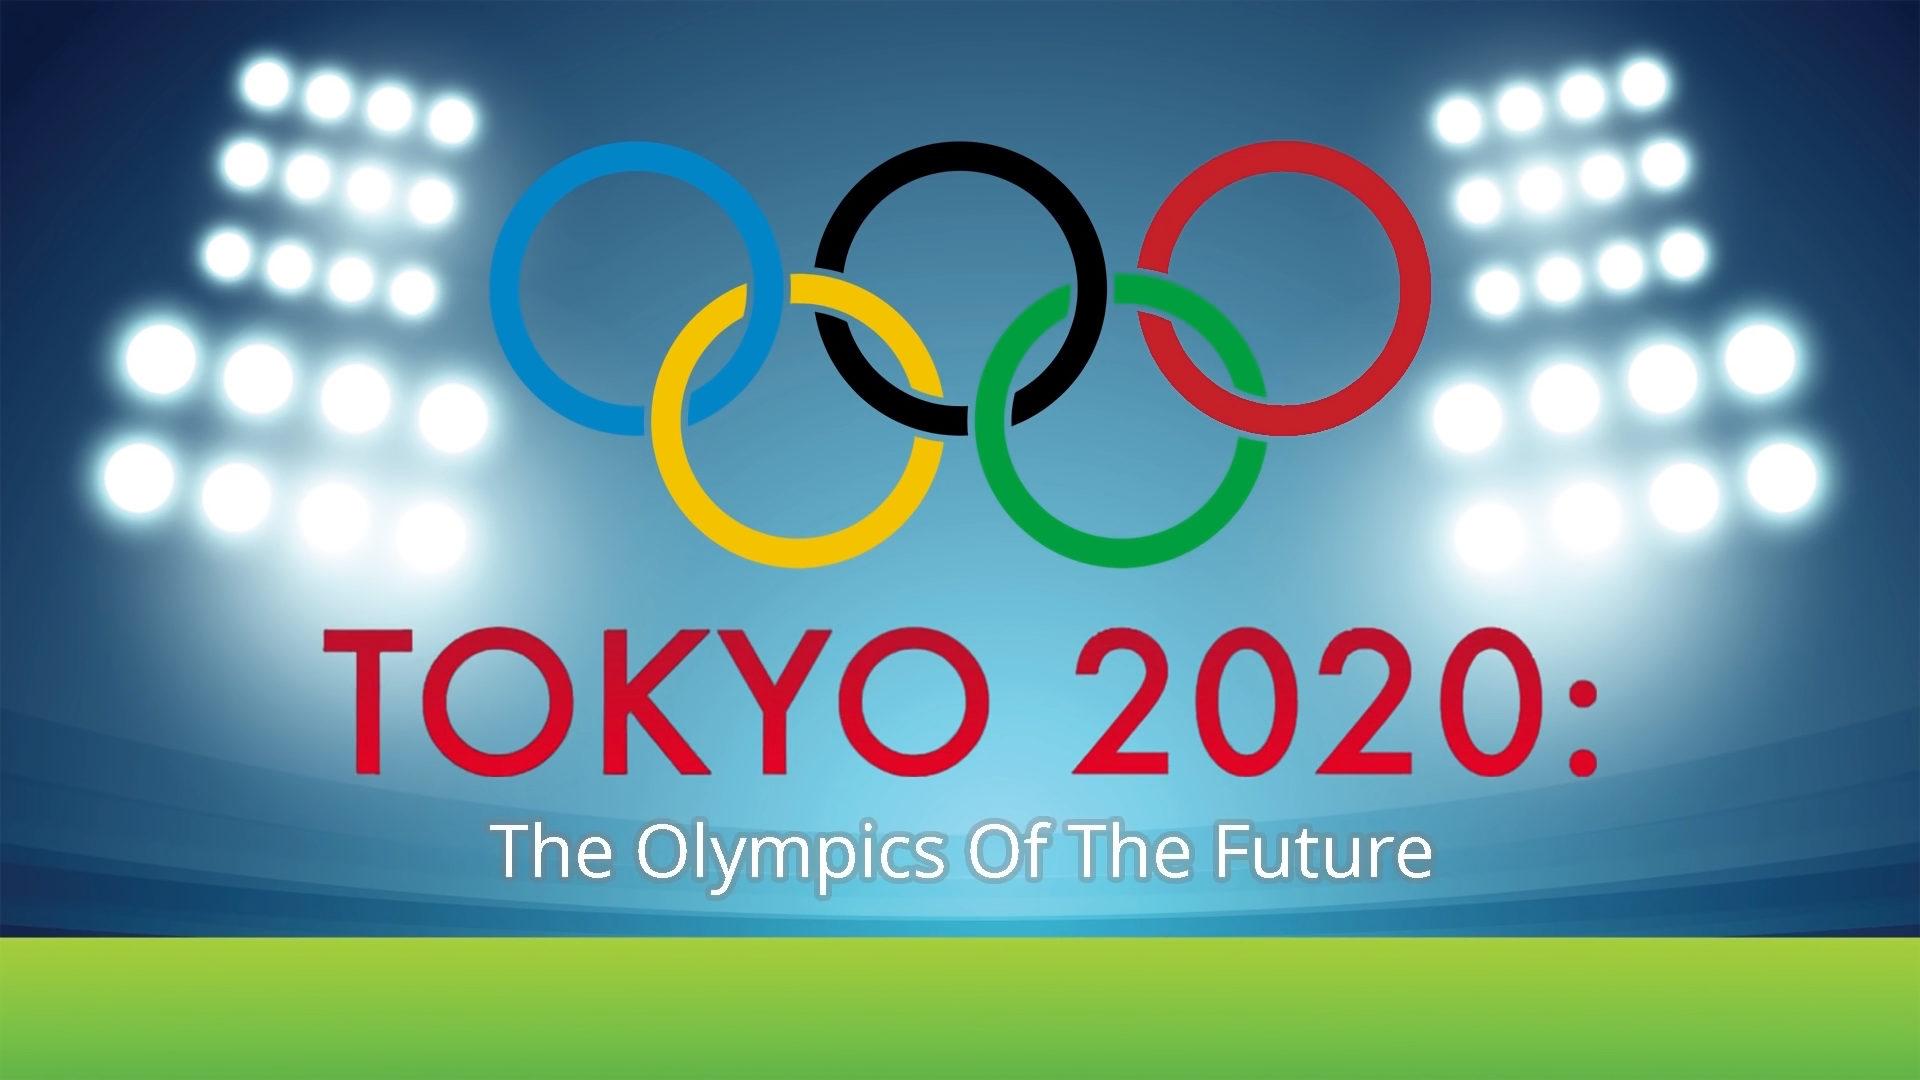 Tokyo taking Olympics 2020 to another level